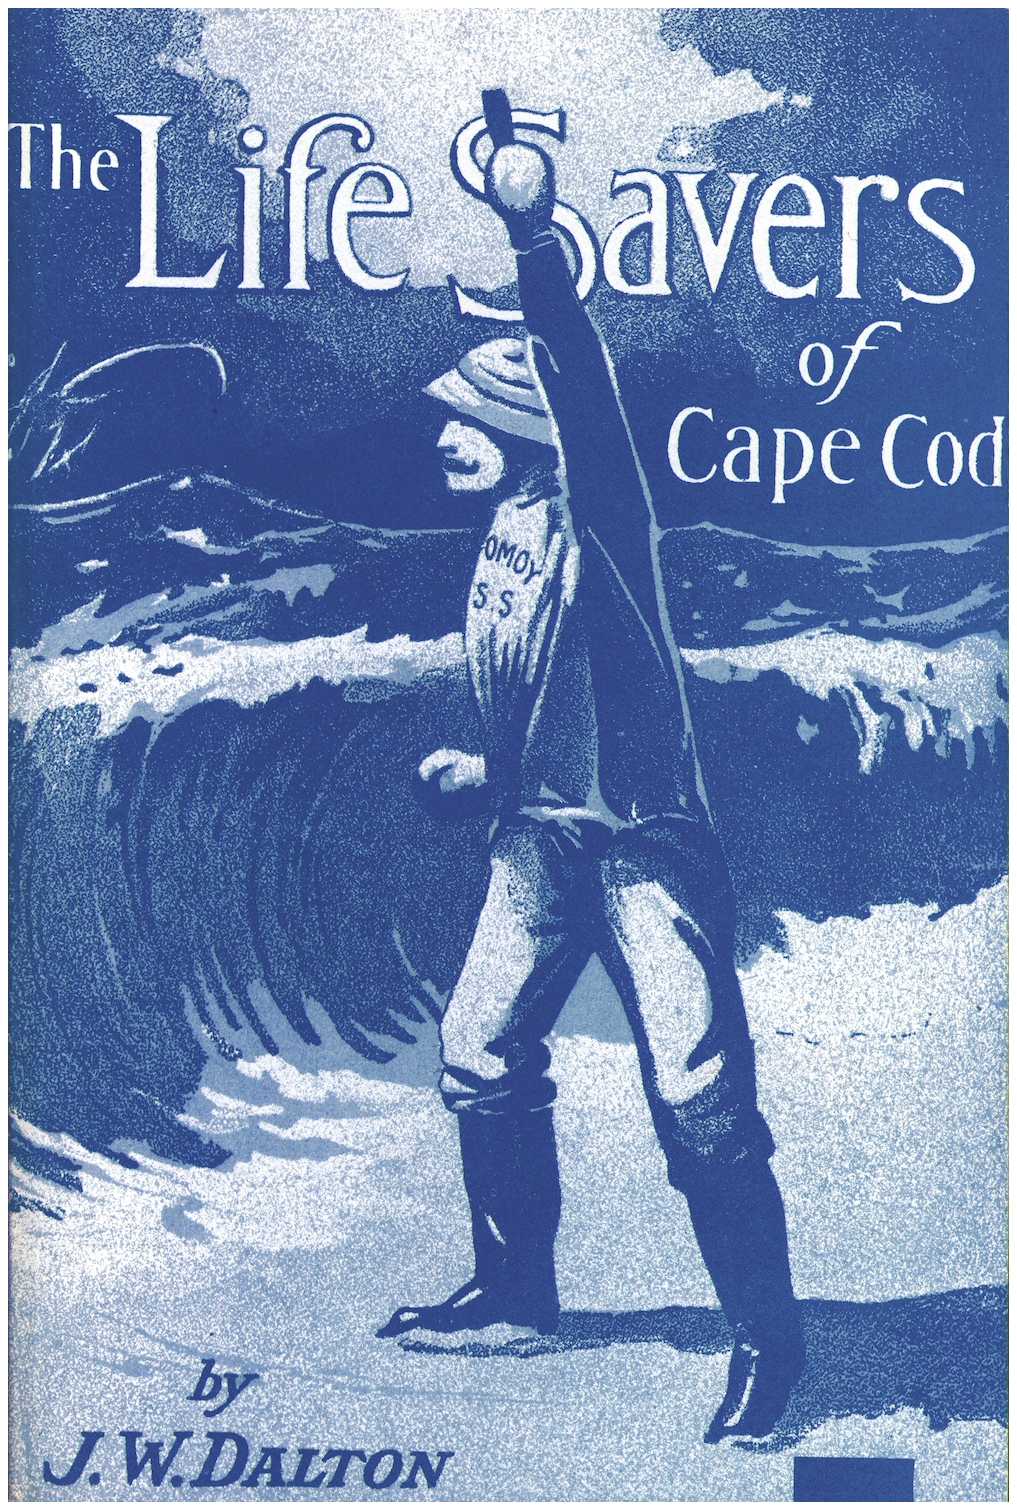 The life savers of Cape Cod